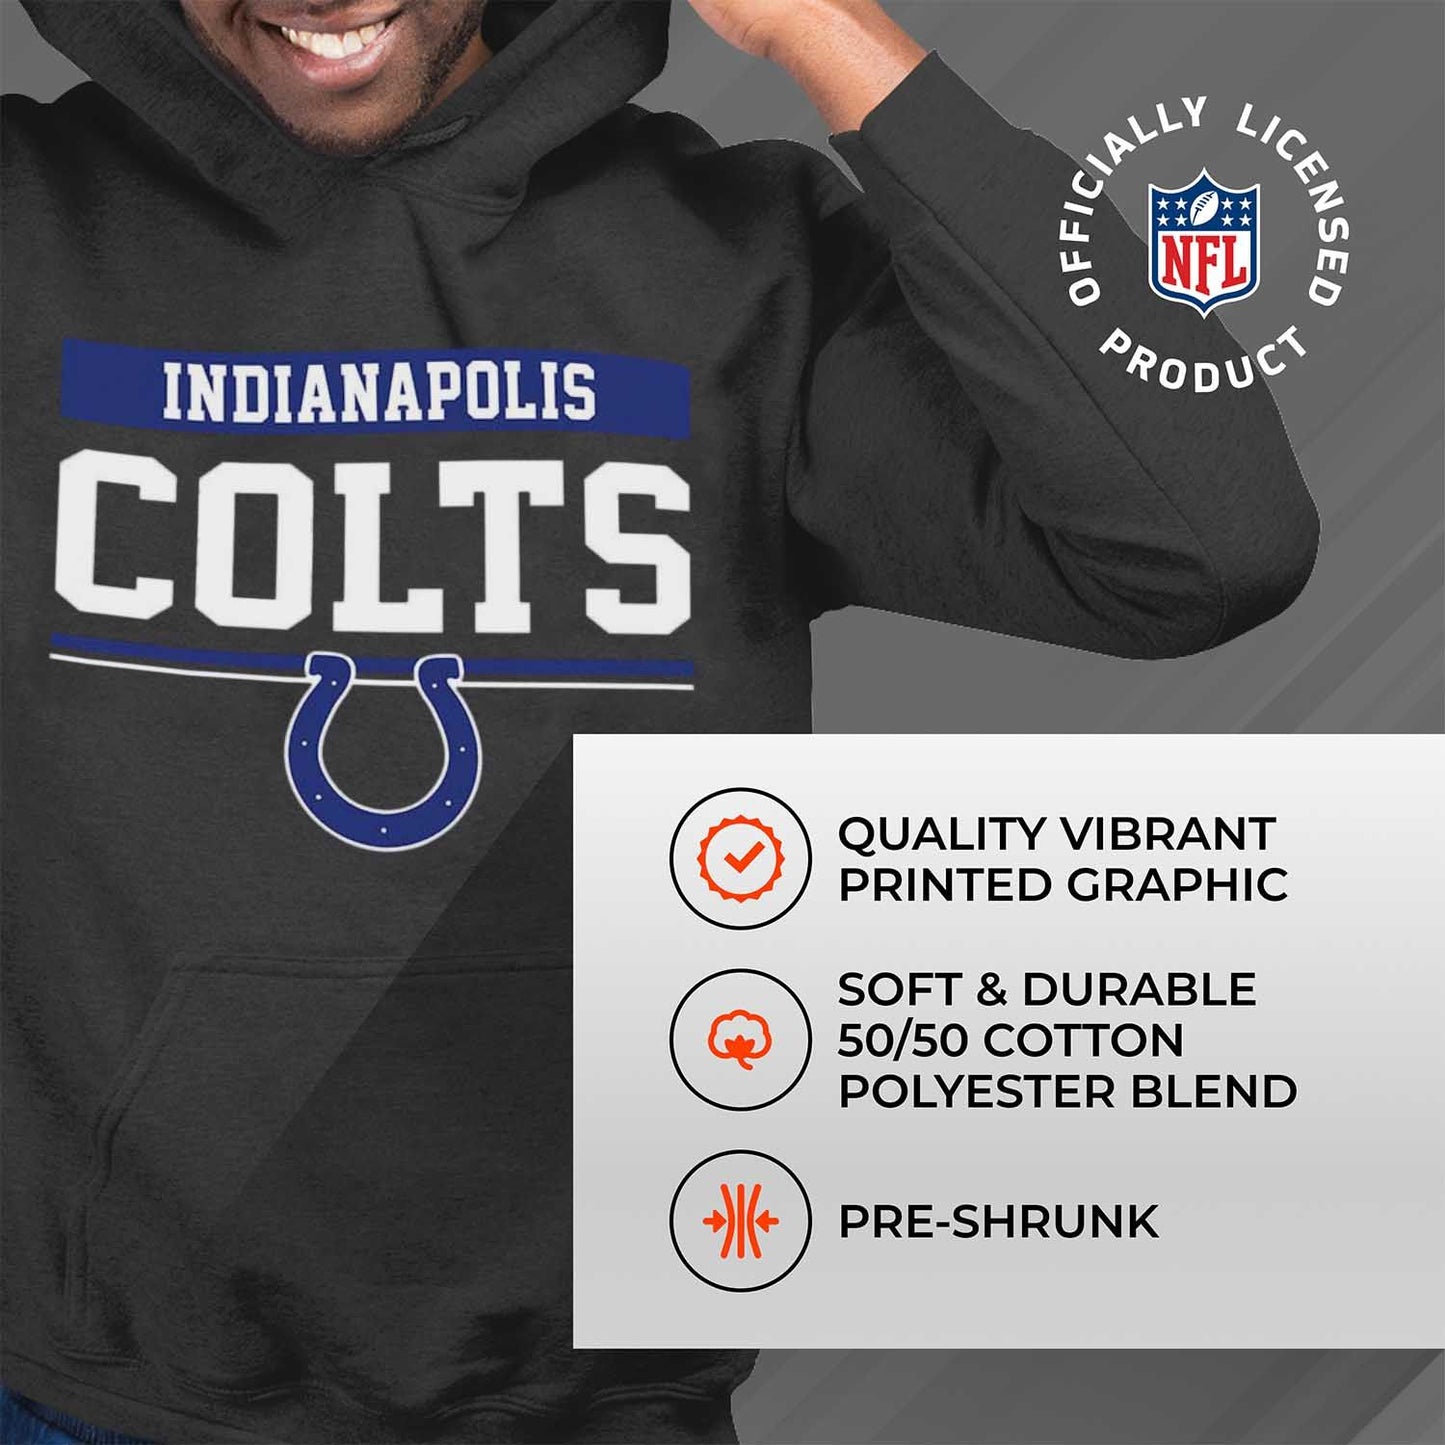 Indianapolis Colts NFL Adult Gameday Charcoal Hooded Sweatshirt - Charcoal